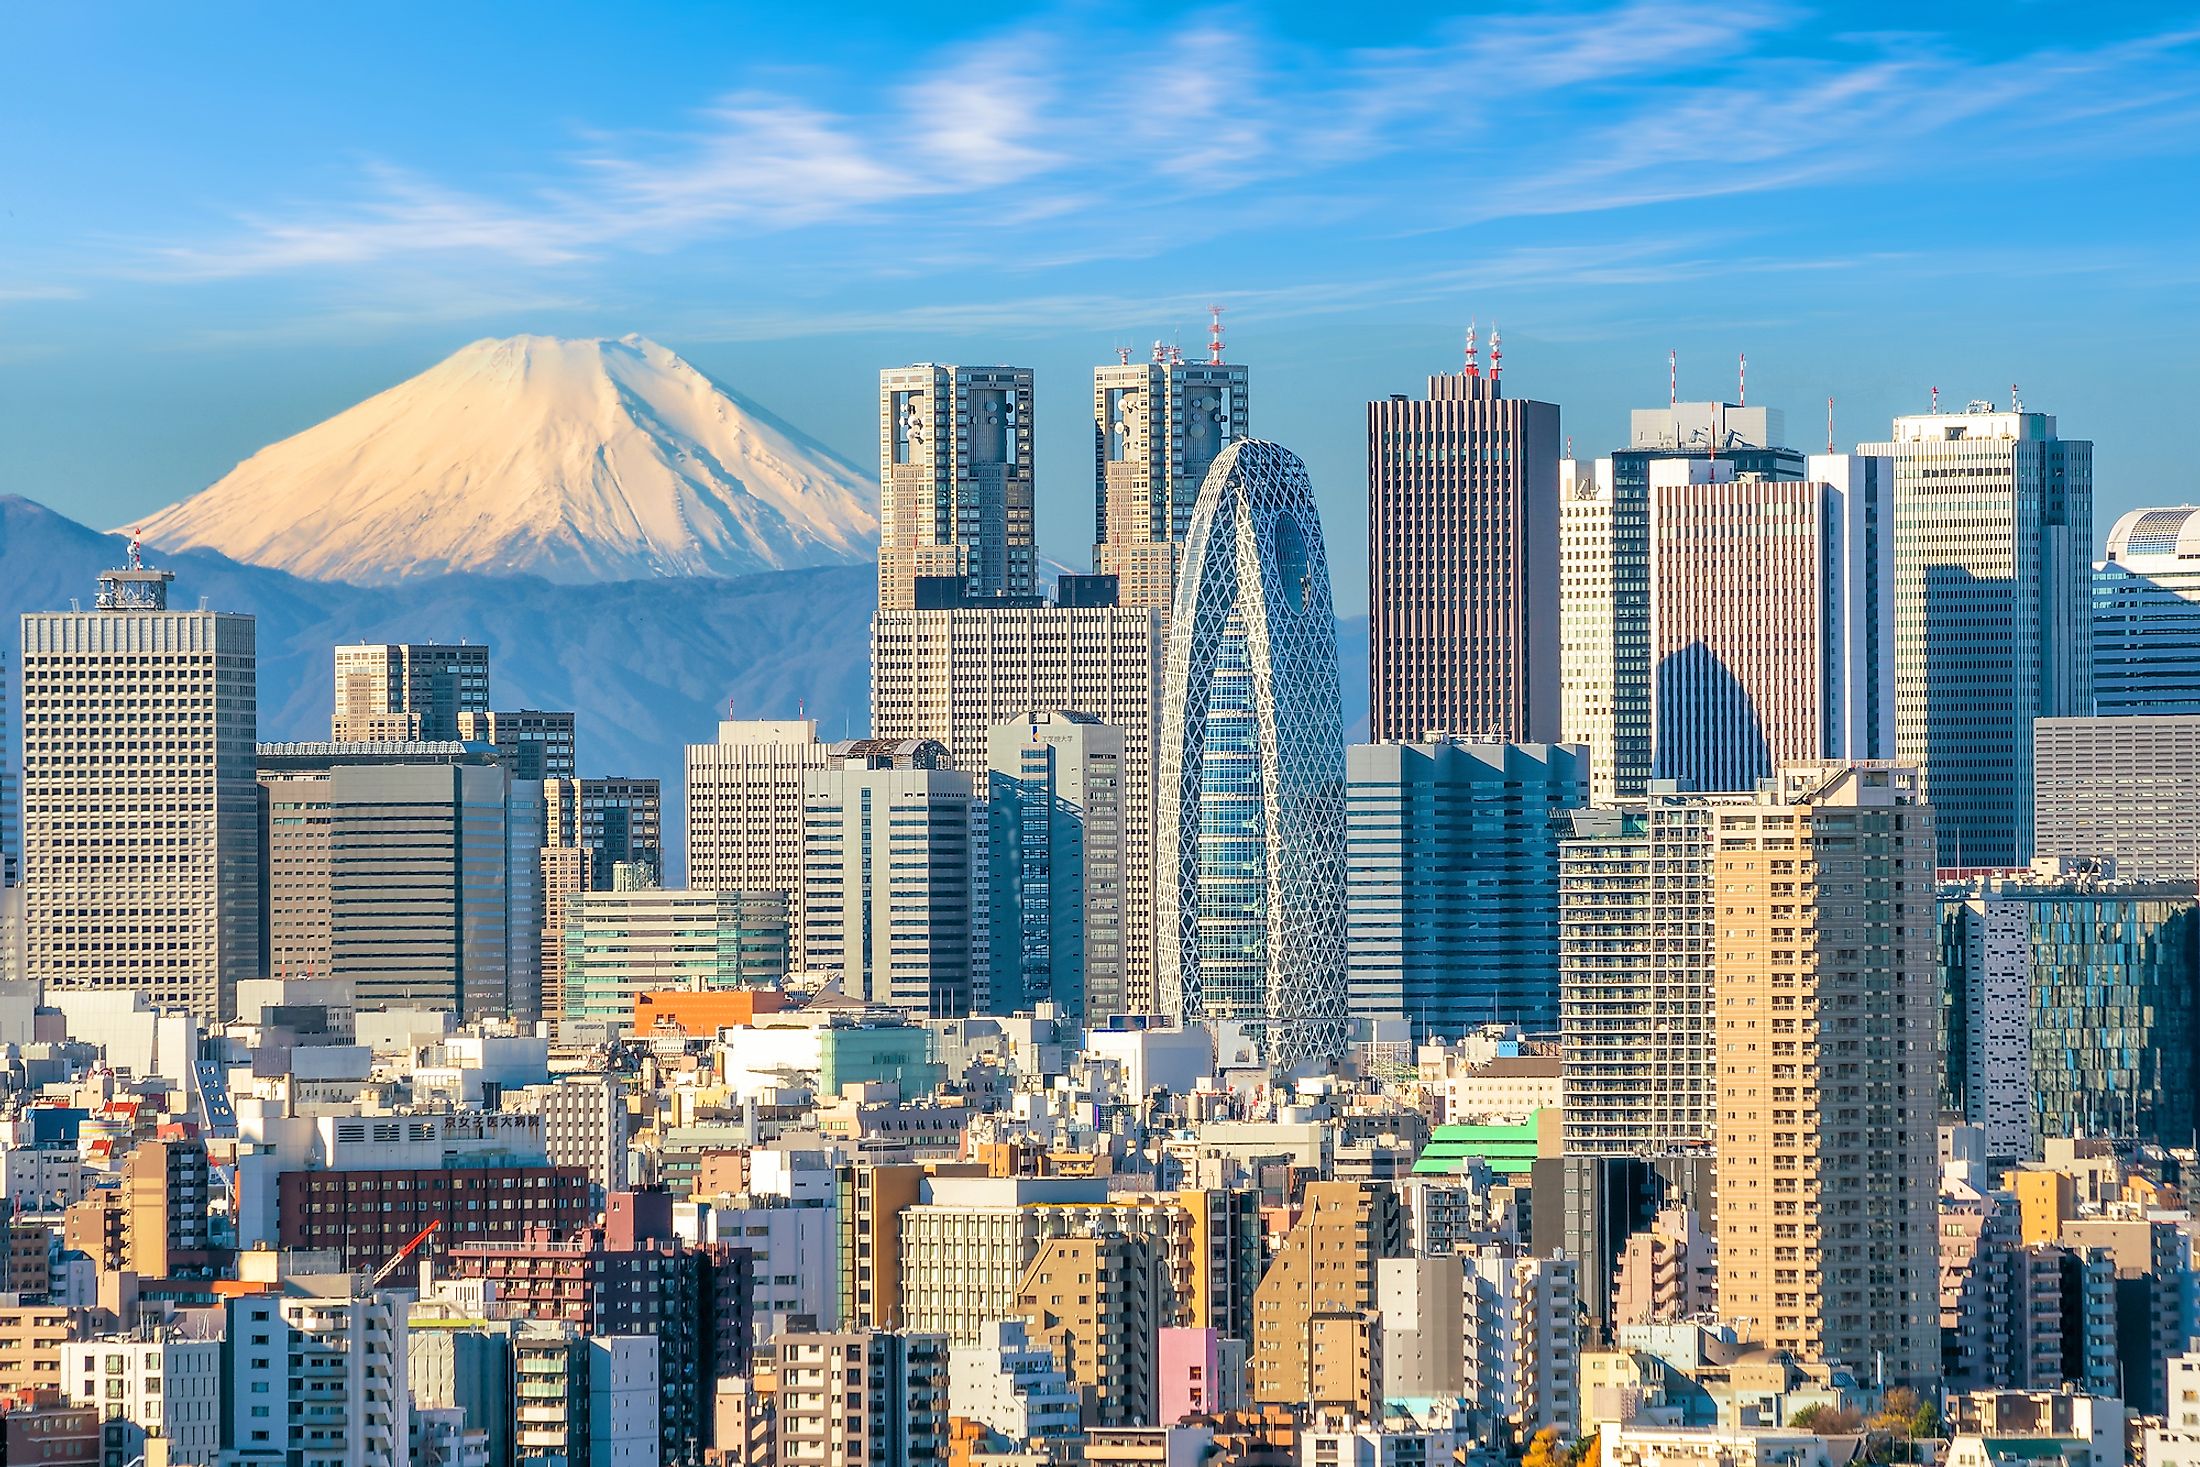 Tokyo, Japan with Mount Fuji in the background.